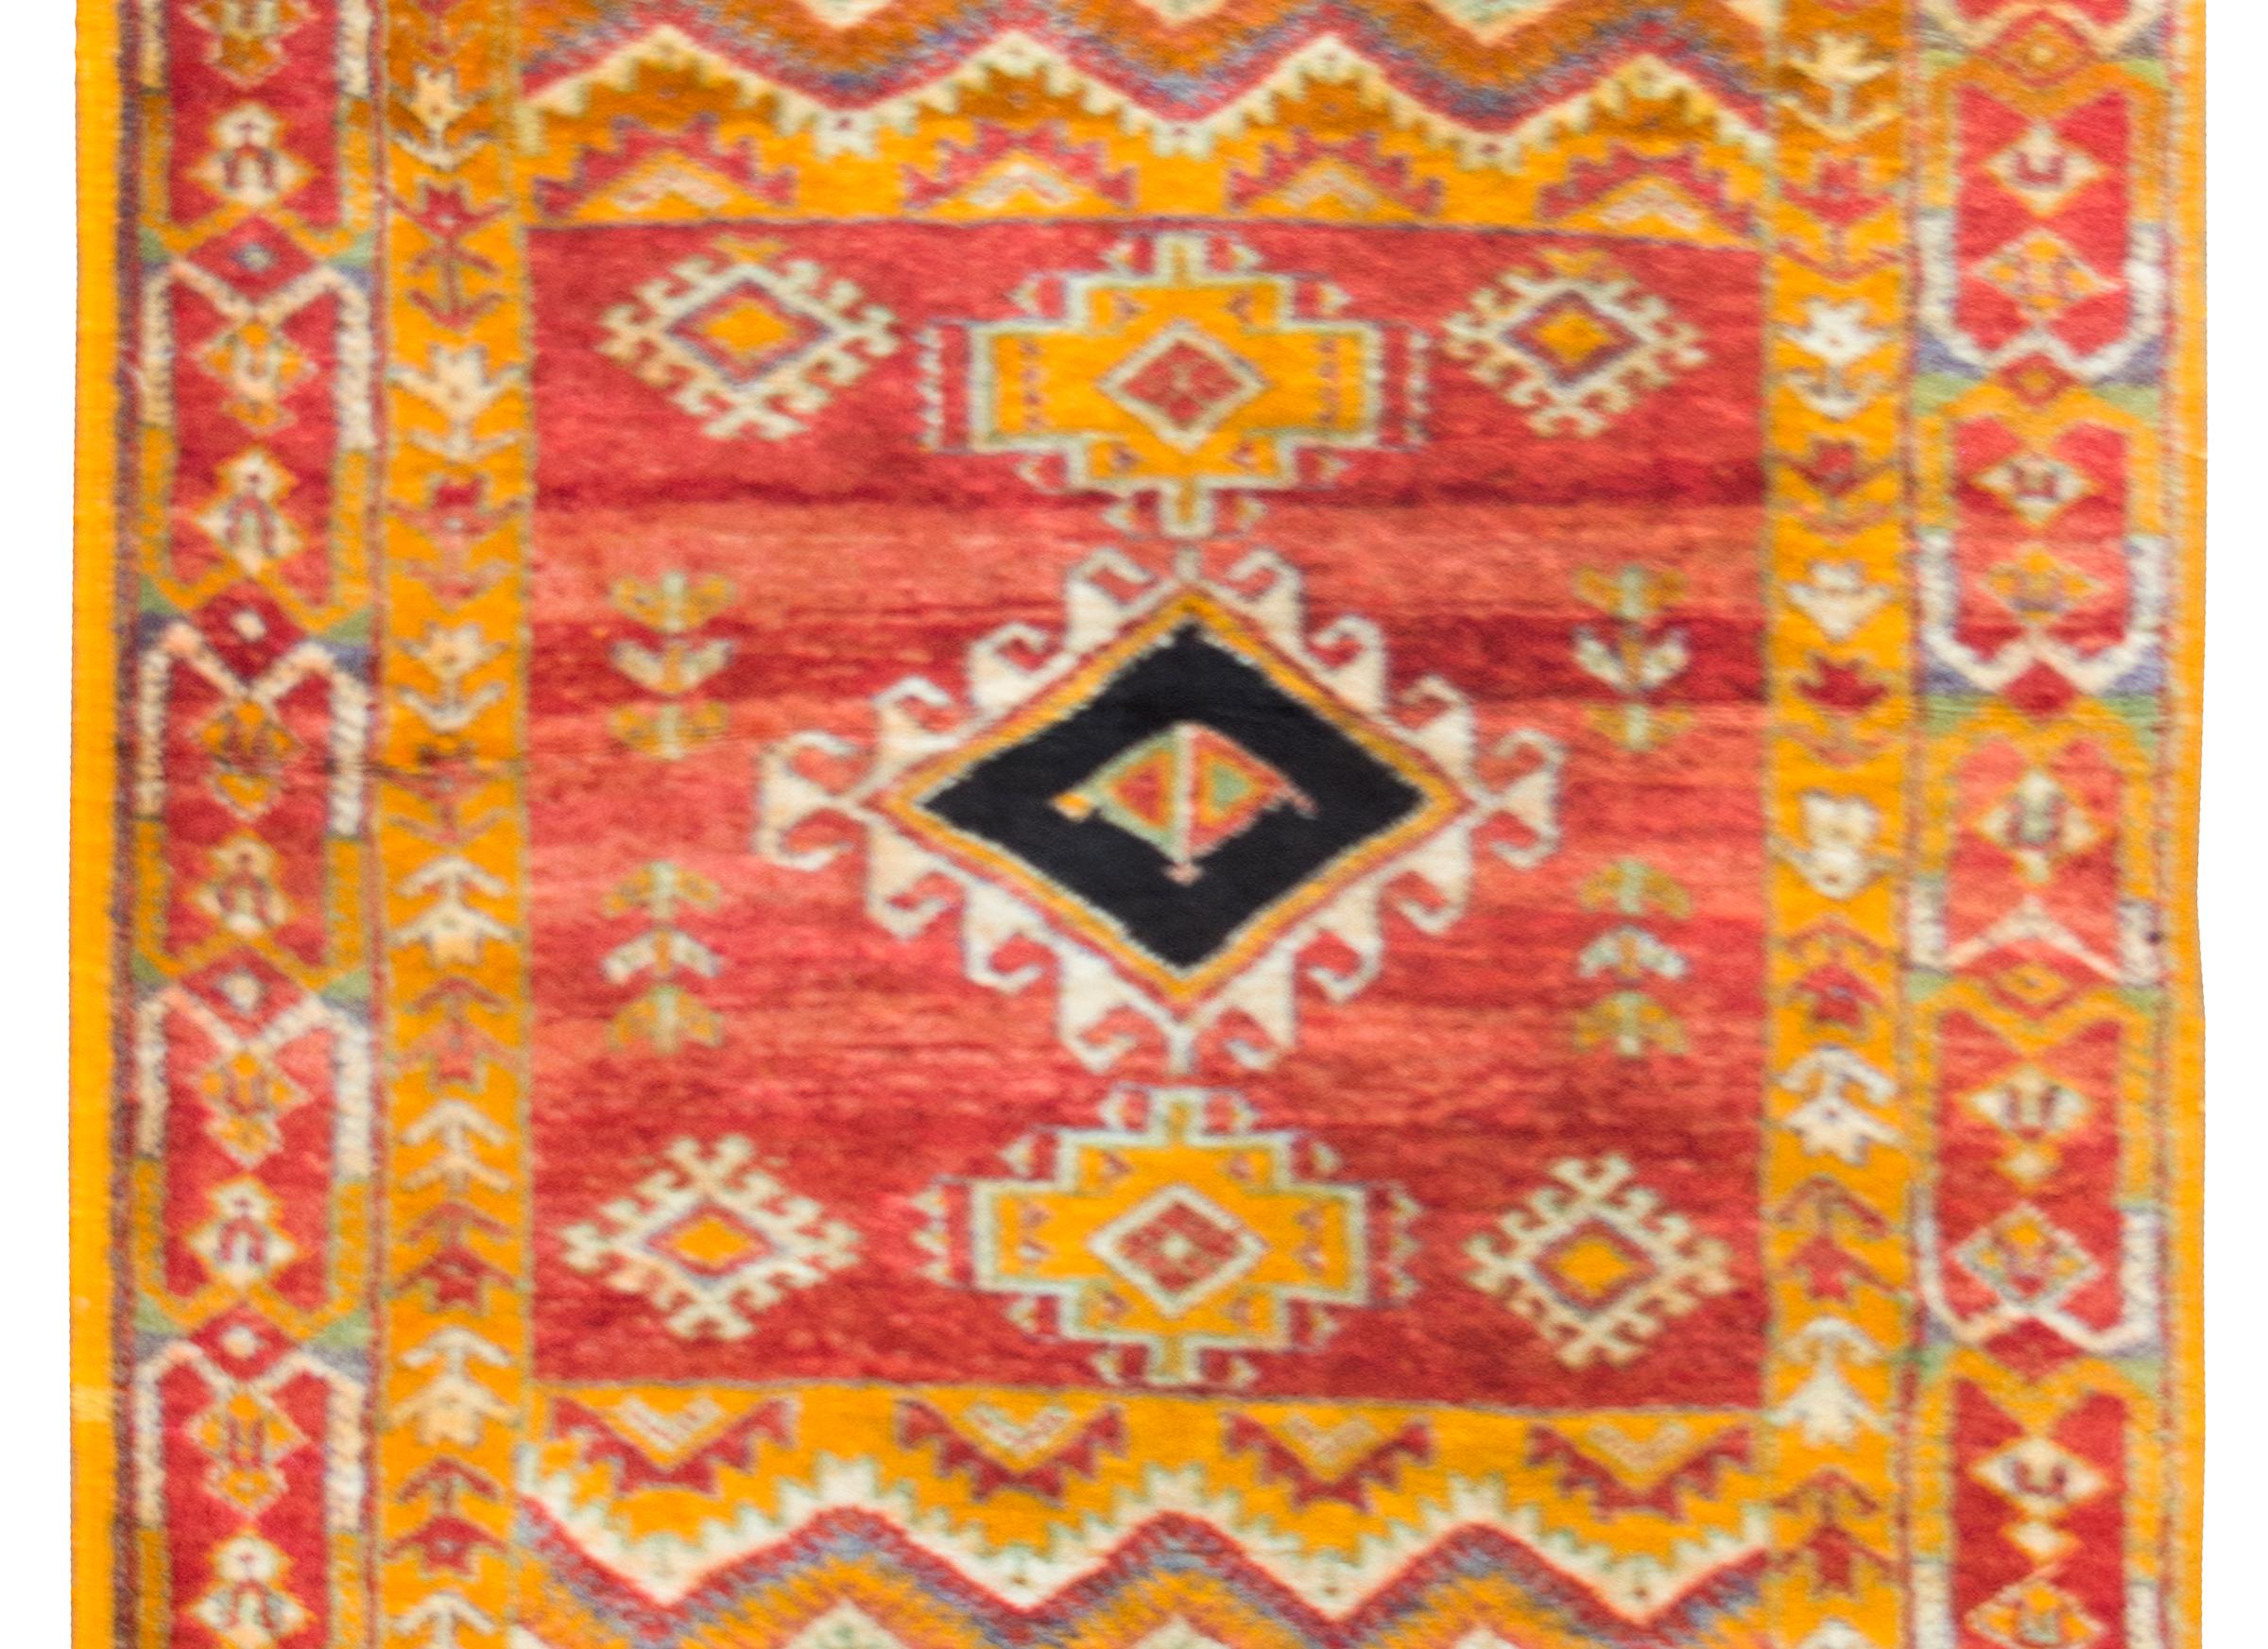 An incredible vintage mid-20th century Moroccan rug with a central stylized floral diamond amidst a square field of more stylized flowers, and flanked by a series of stripes with more diamonds, and all surrounded by a border of more repeated